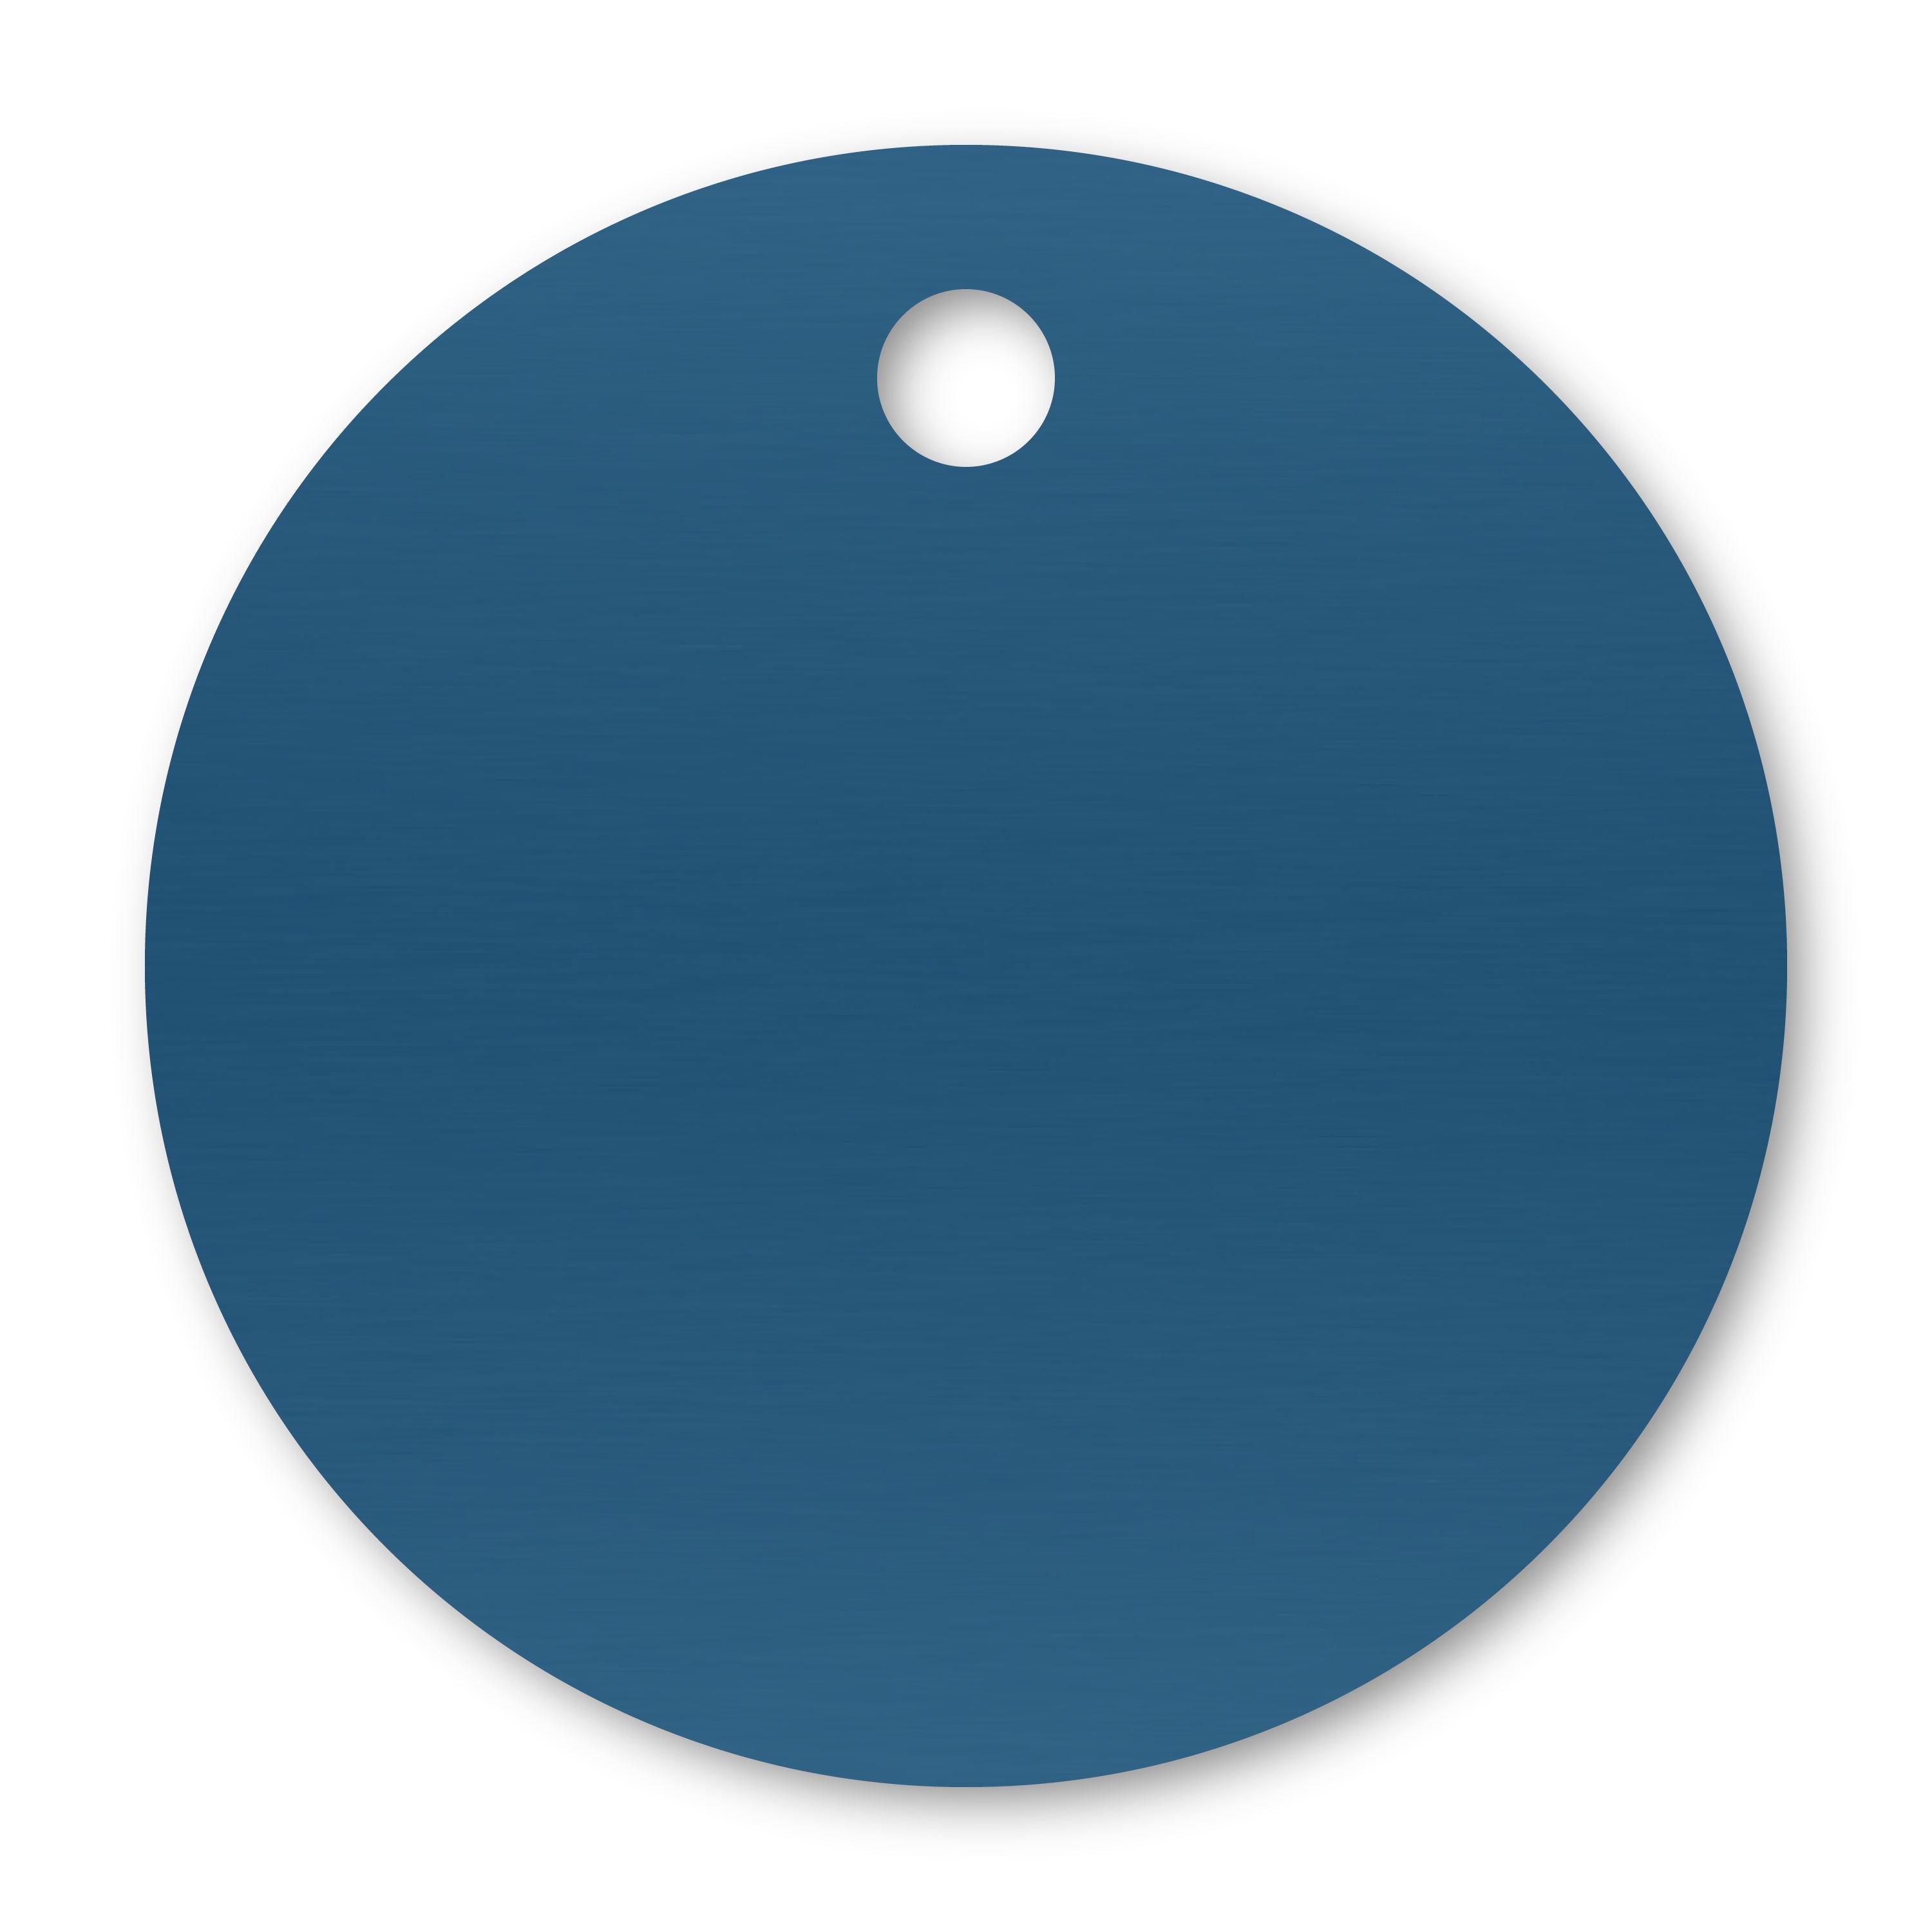 Anodized Aluminum Round Tags, 7/8" with 3/32" Hole, Laser Engraved Metal Tags Craftworks NW Blue 